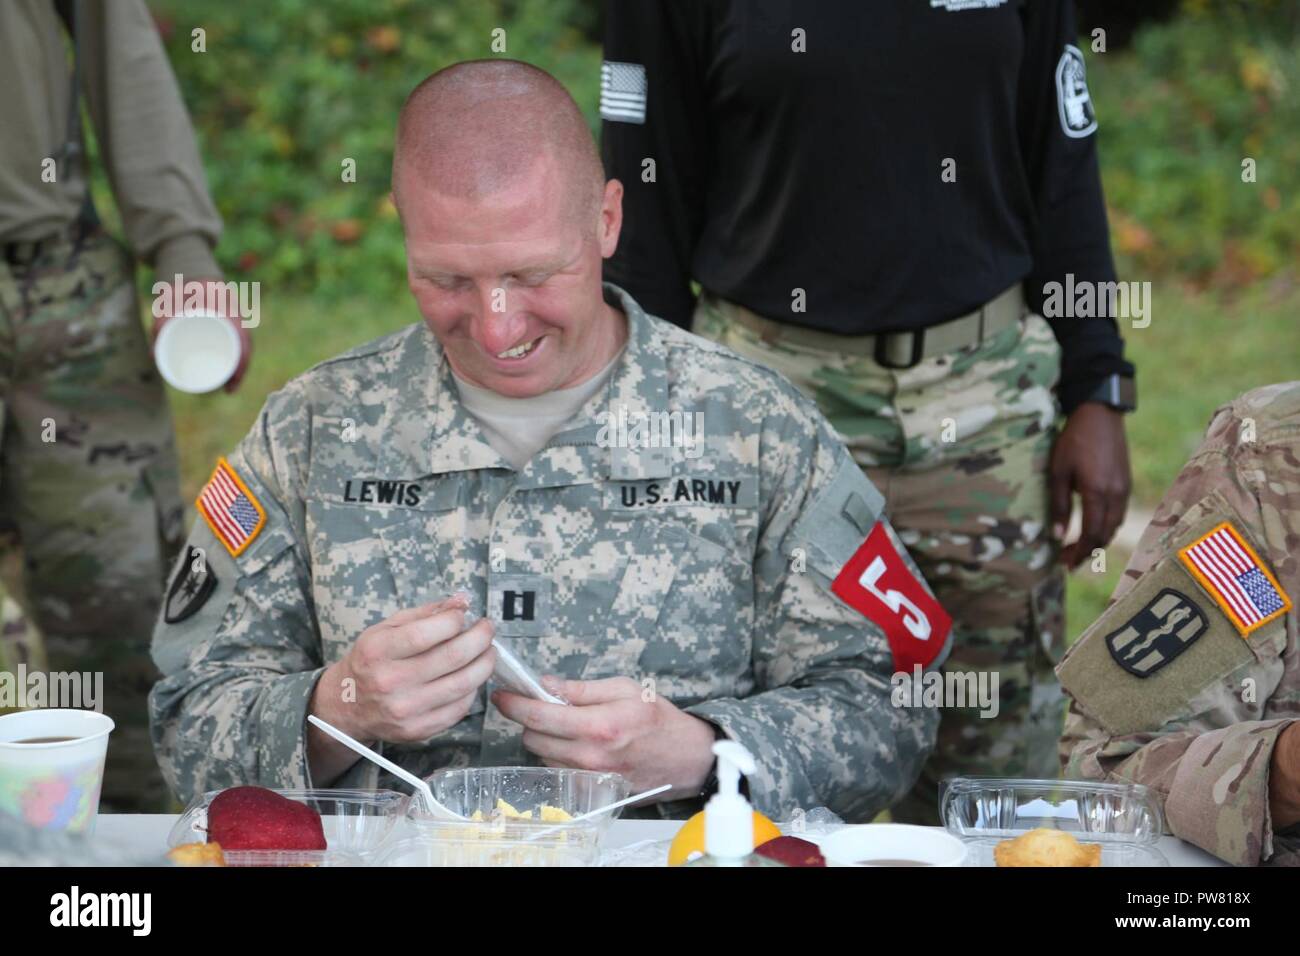 U.S. Army Capt. Jeremy Lewis, assigned to the Public Health Command - Atlantic, enjoys a hot breakfast after completing the 2017 Best Medic Competition at Fort Bragg, N.C., Sept. 20, 2017. The competition tested the physical and mental toughness, as well as the technical competence, of each medic to identify the team moving forward to represent the region at the next level of the competition. Stock Photo